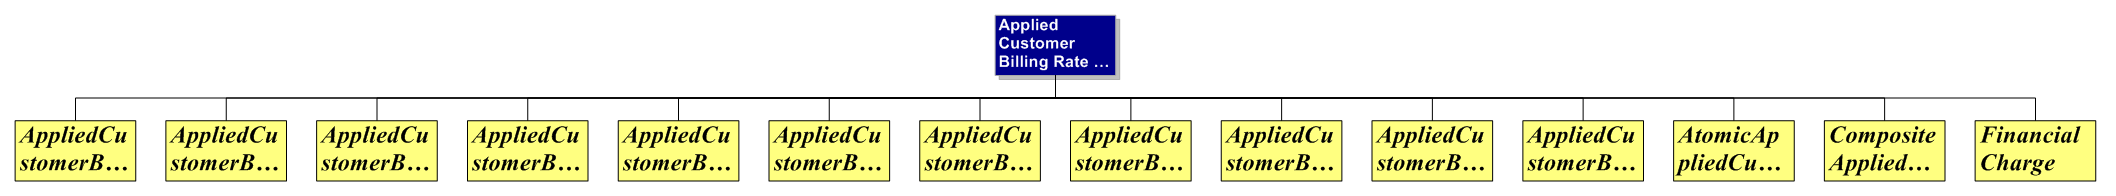 Applied Customer Billing Rate ABE